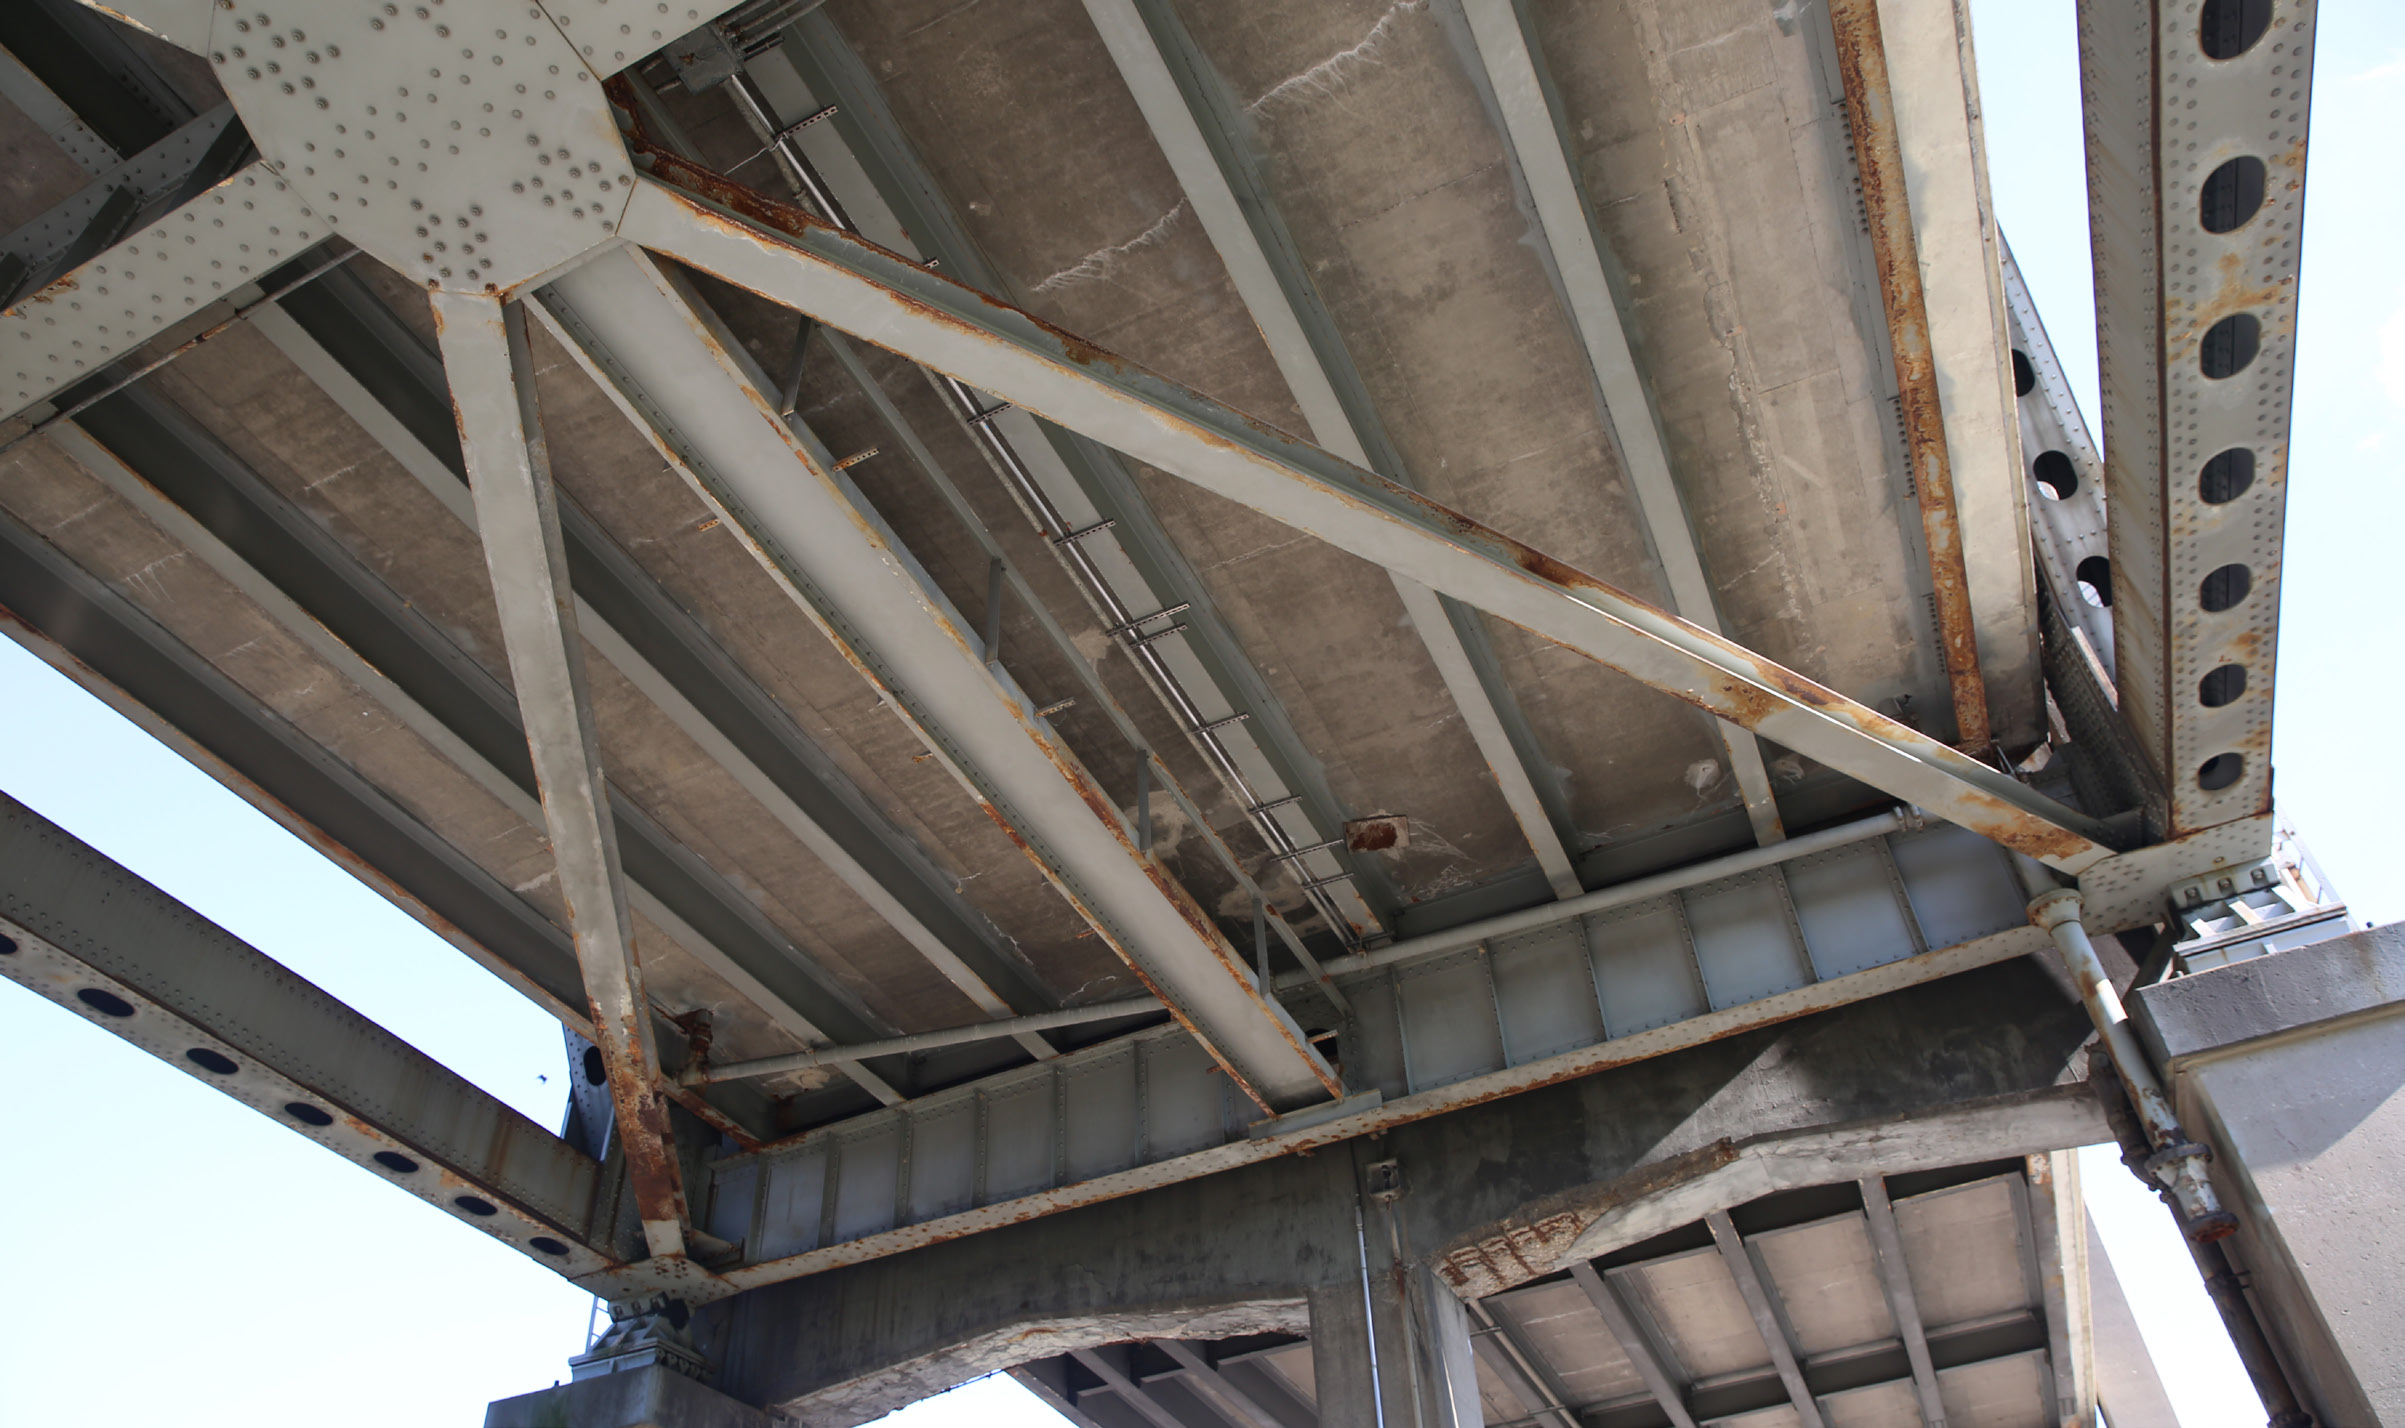 image of the upper bridge deck that shows corrosion